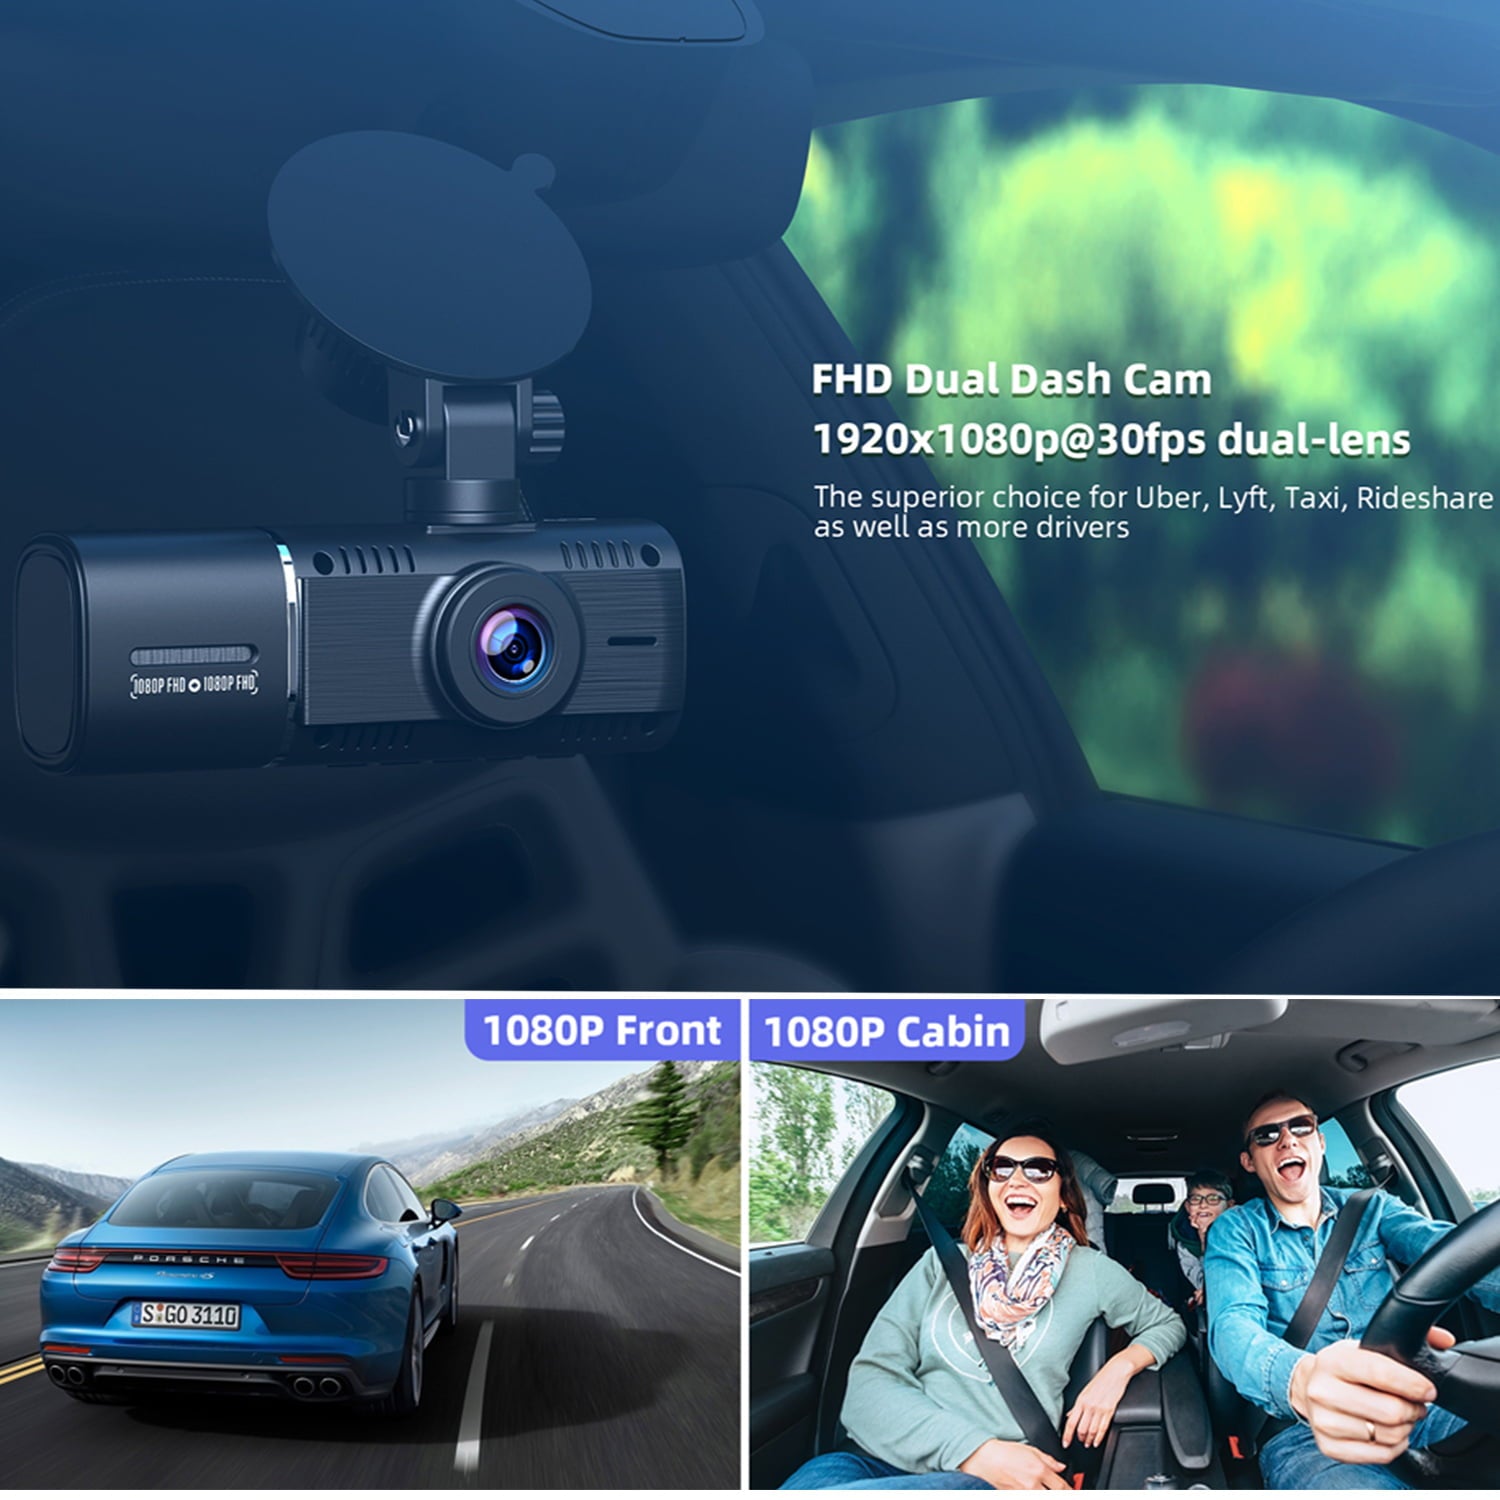 BuyOnline365.com - TOGUARD Uber Dual Dash Cam FHD 1080P+1080P Front and  Rear View Car #Camera 2 LCD 340° Outside and Inside Dual Dashboard #Camera  with #Sony Sensor, Loop Recording, Parking Mode for